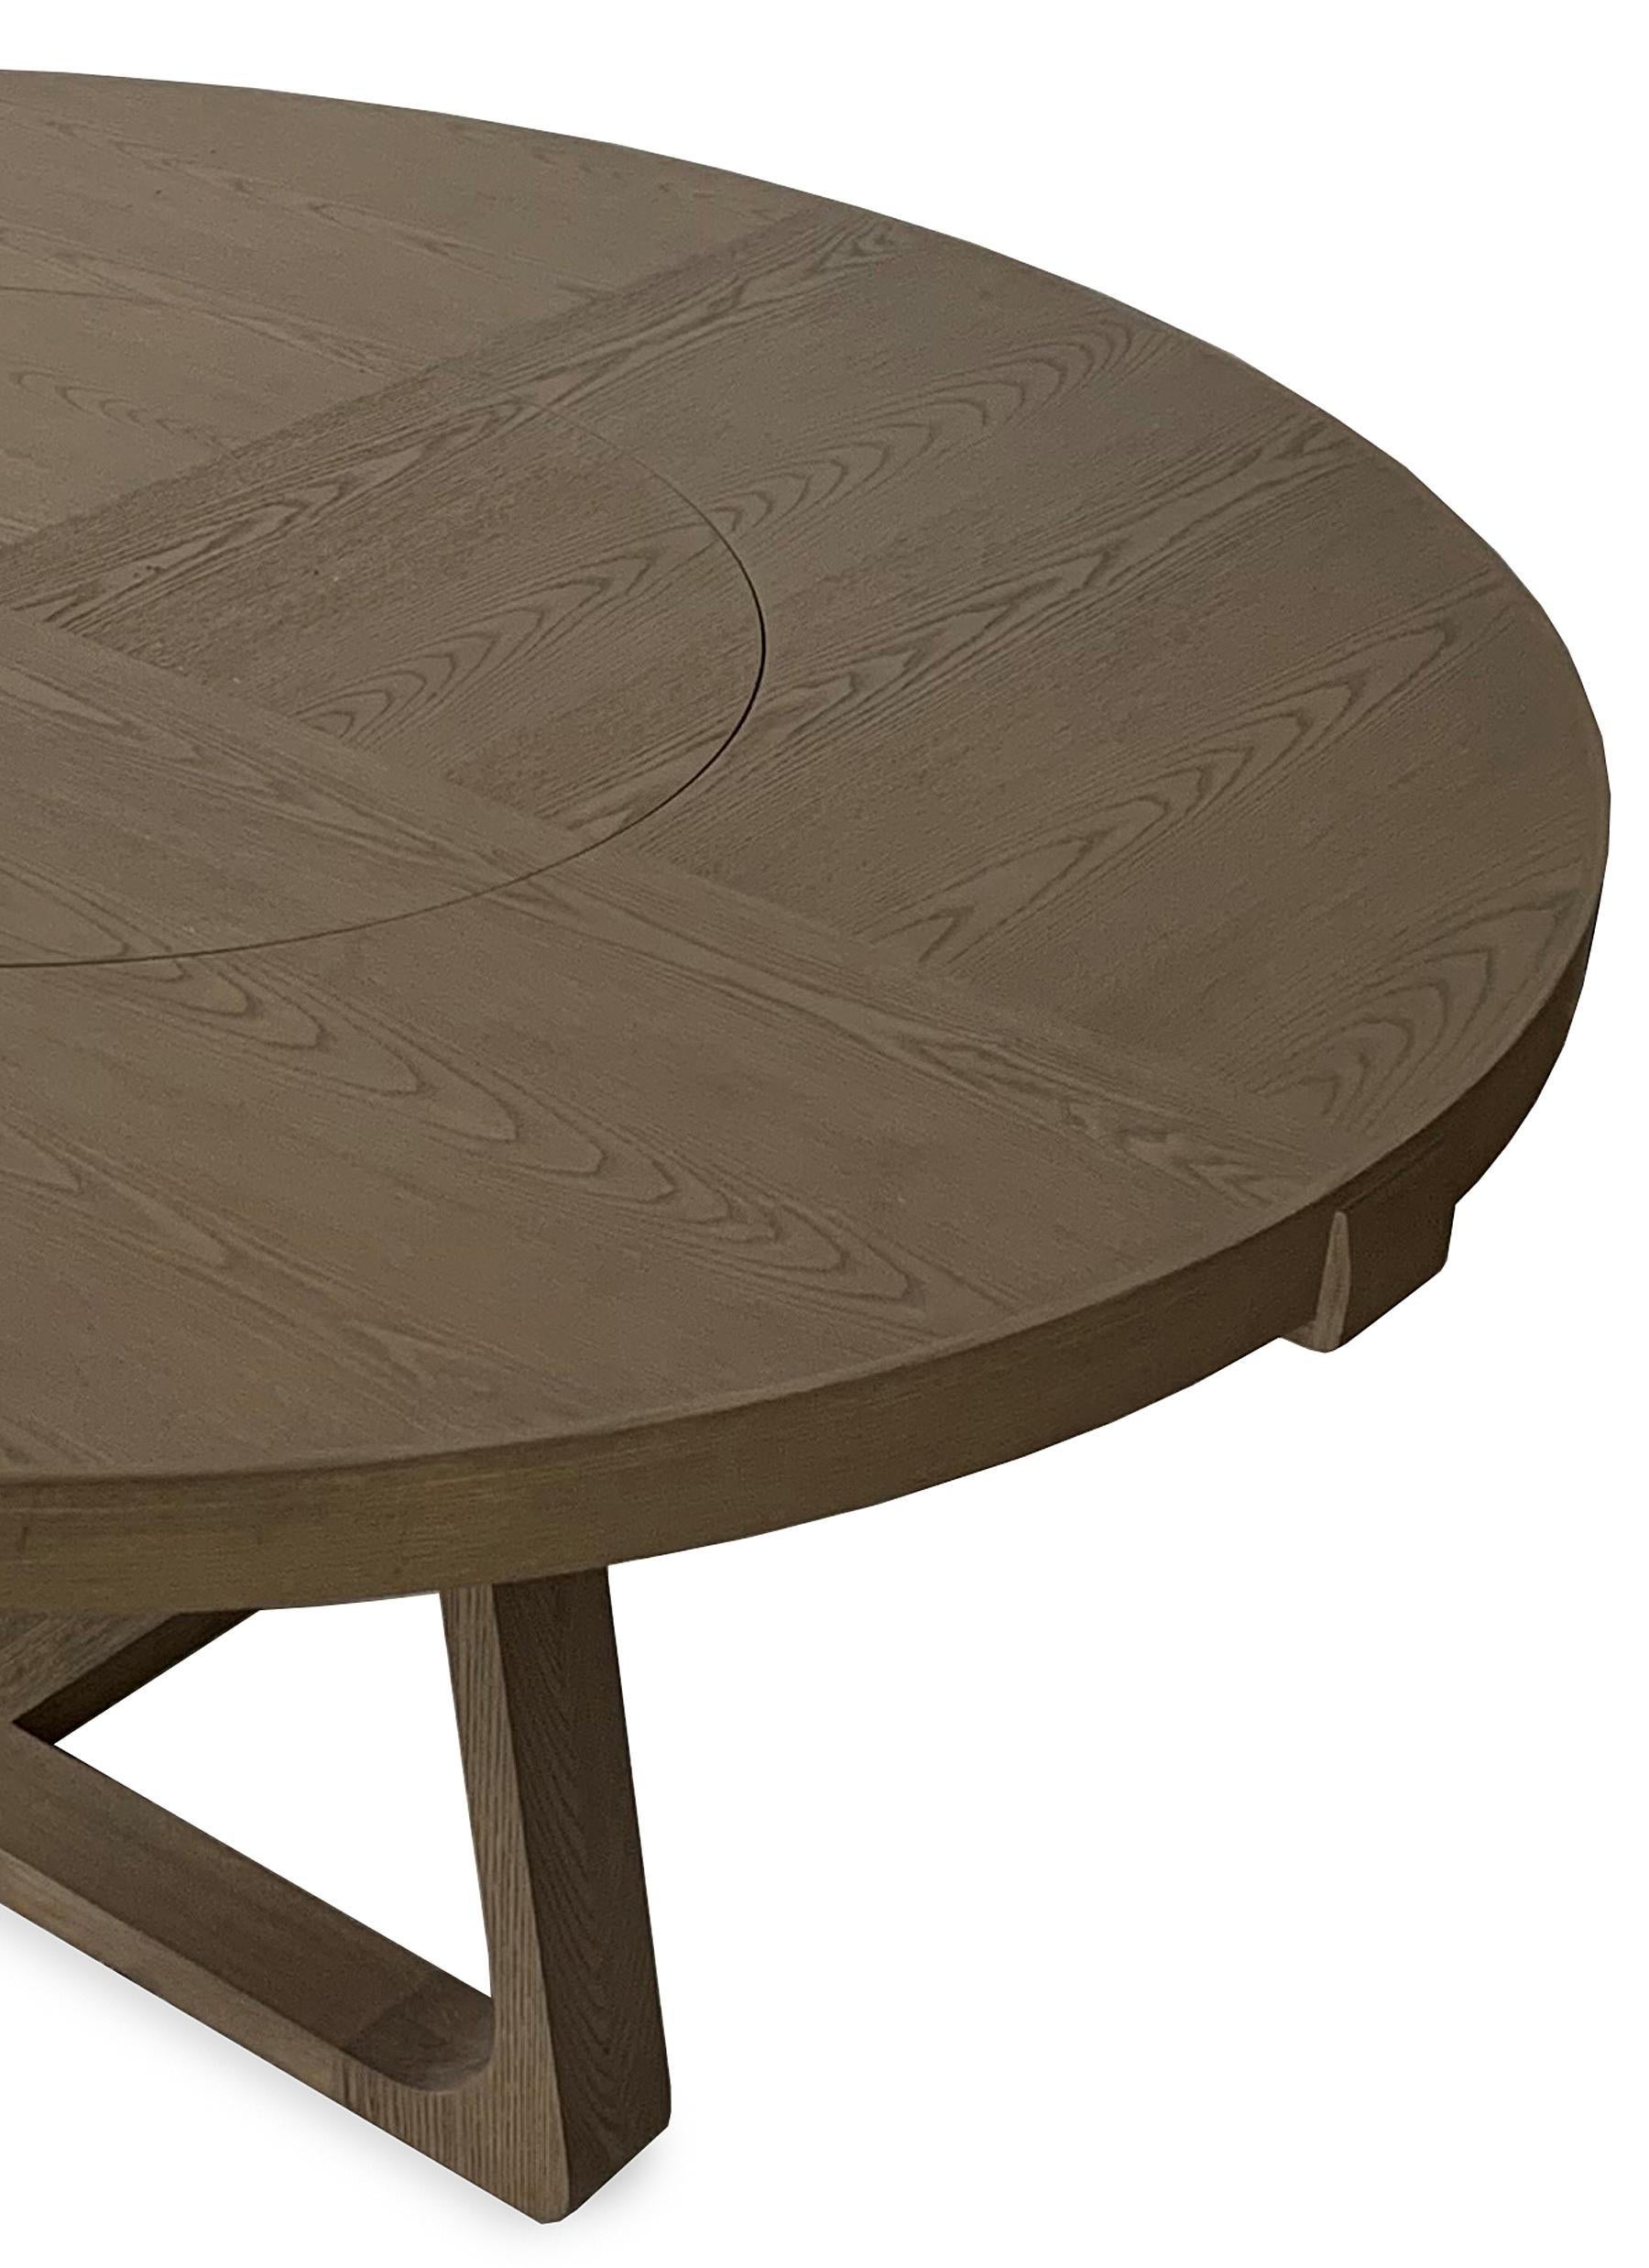 dining table with built in lazy susan